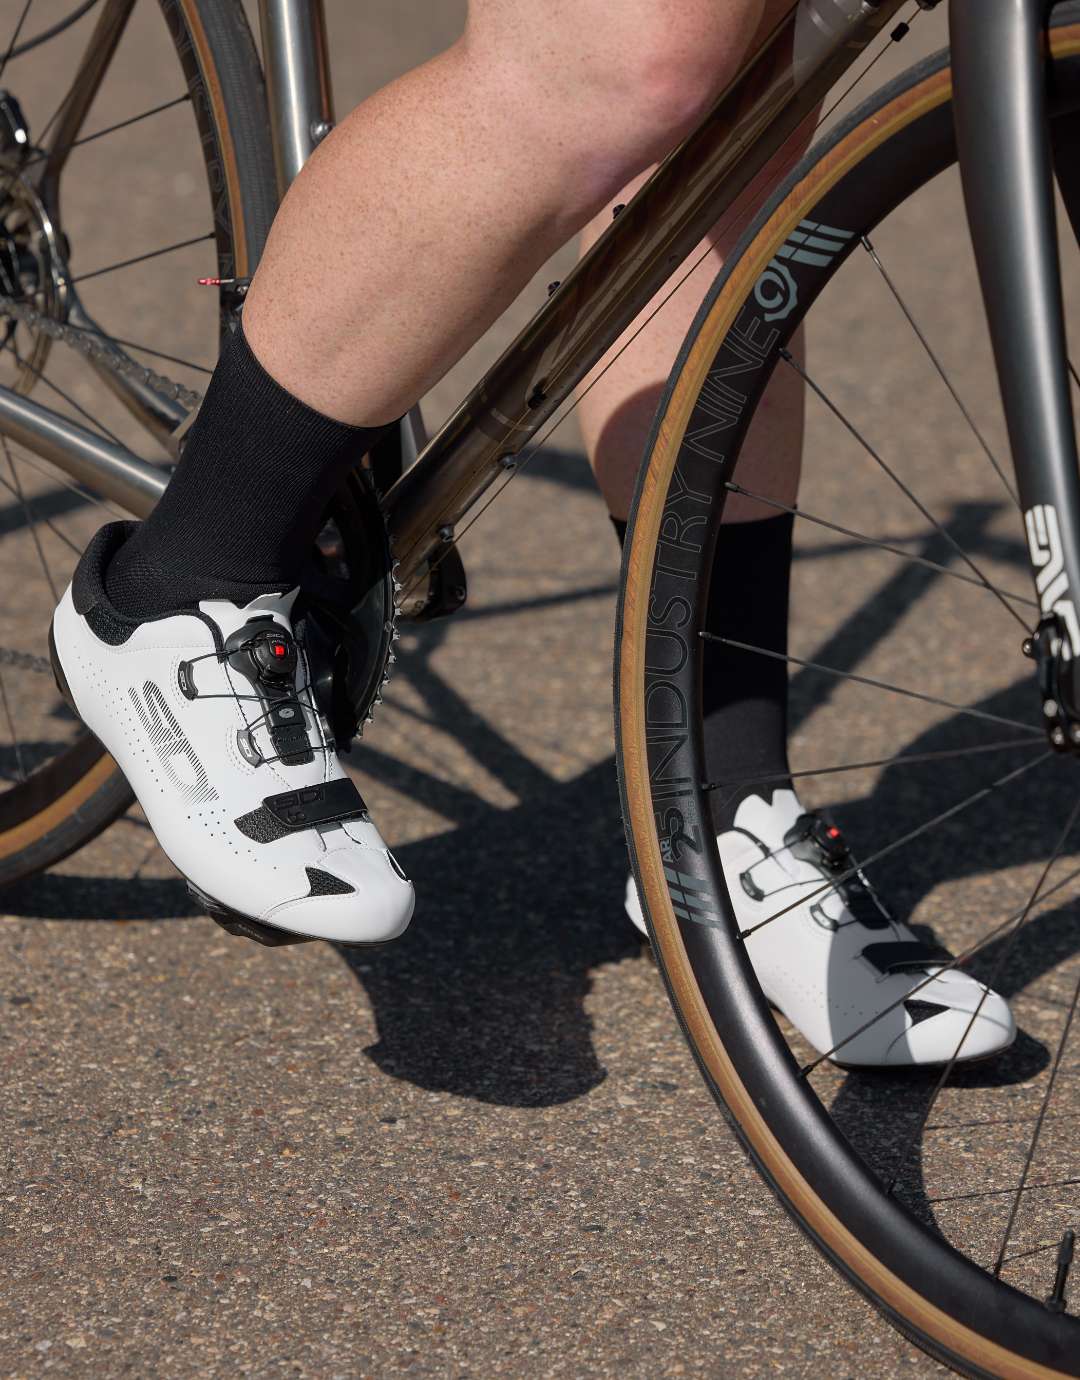 Person wearing Sidi road cycling shoes